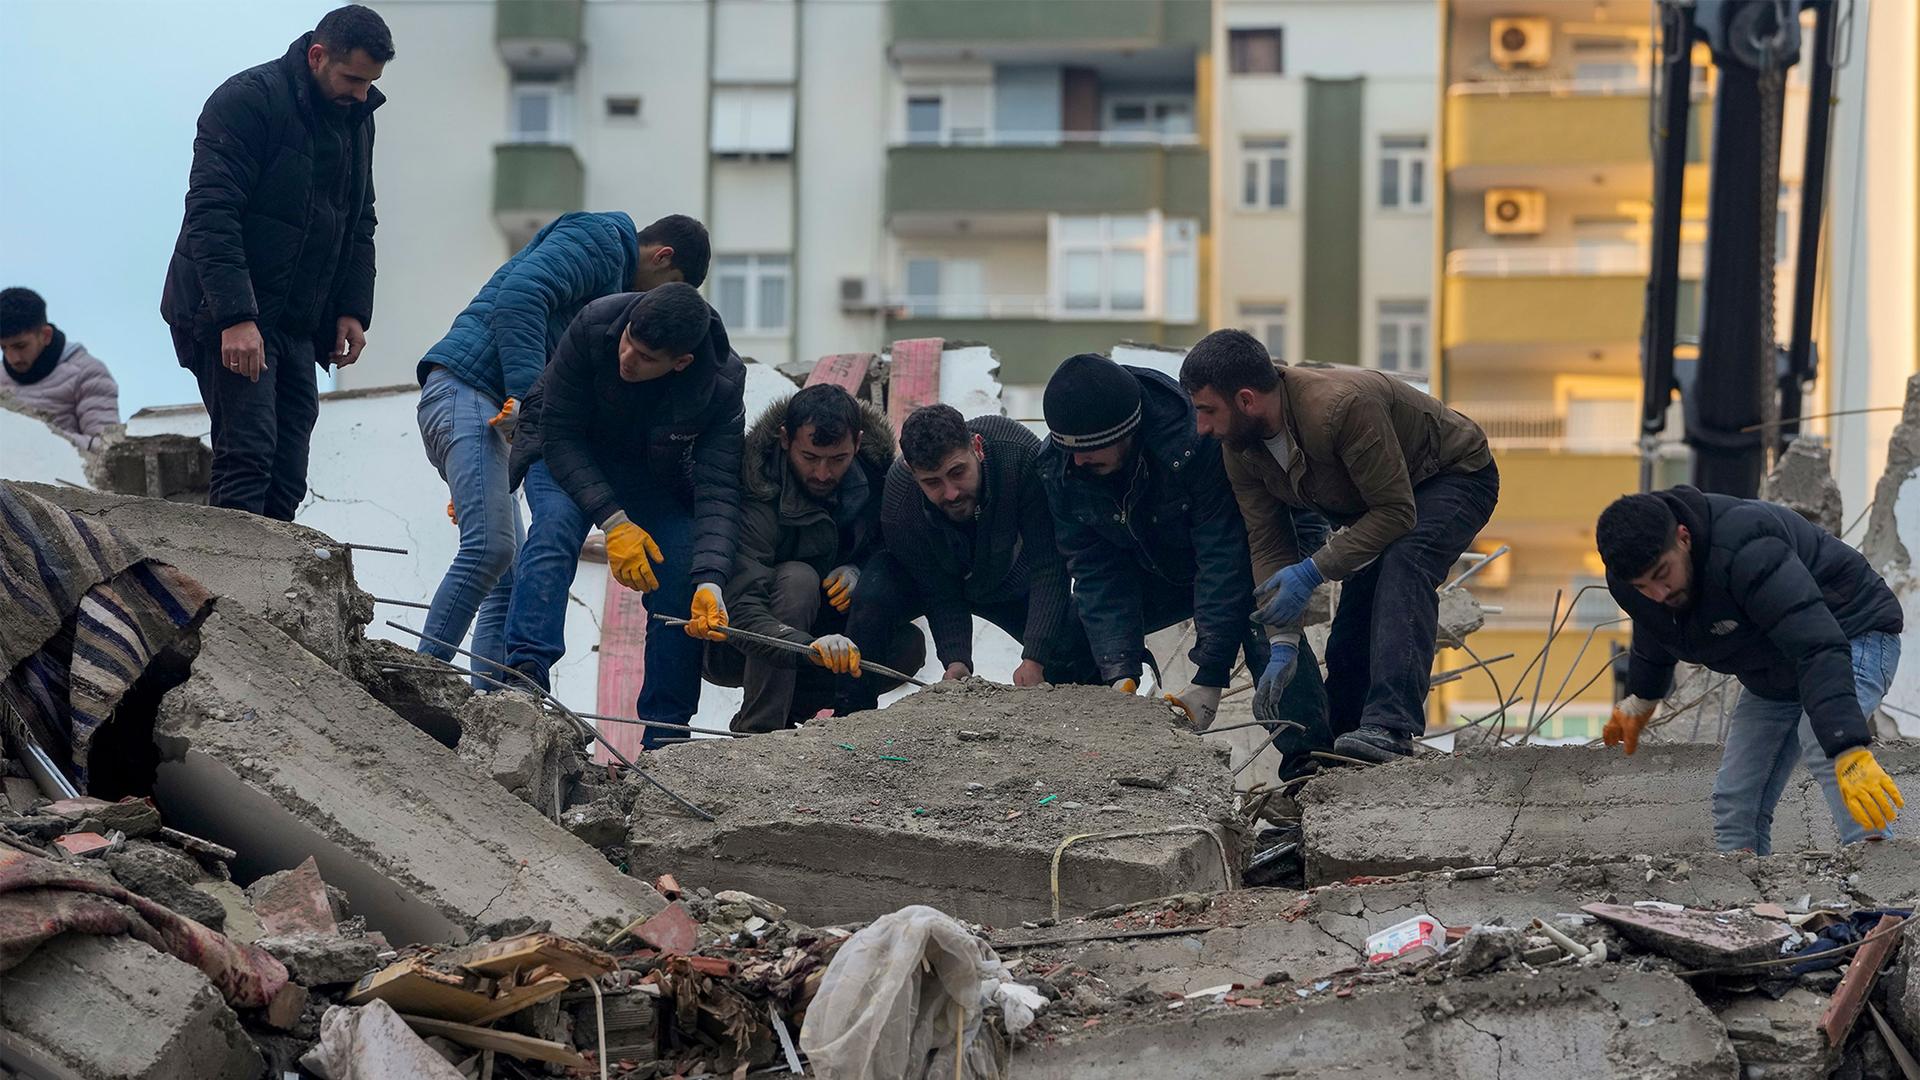 Men remove debris as they search for people in a destroyed building in Adana, Turkey, Feb. 6, 2023.